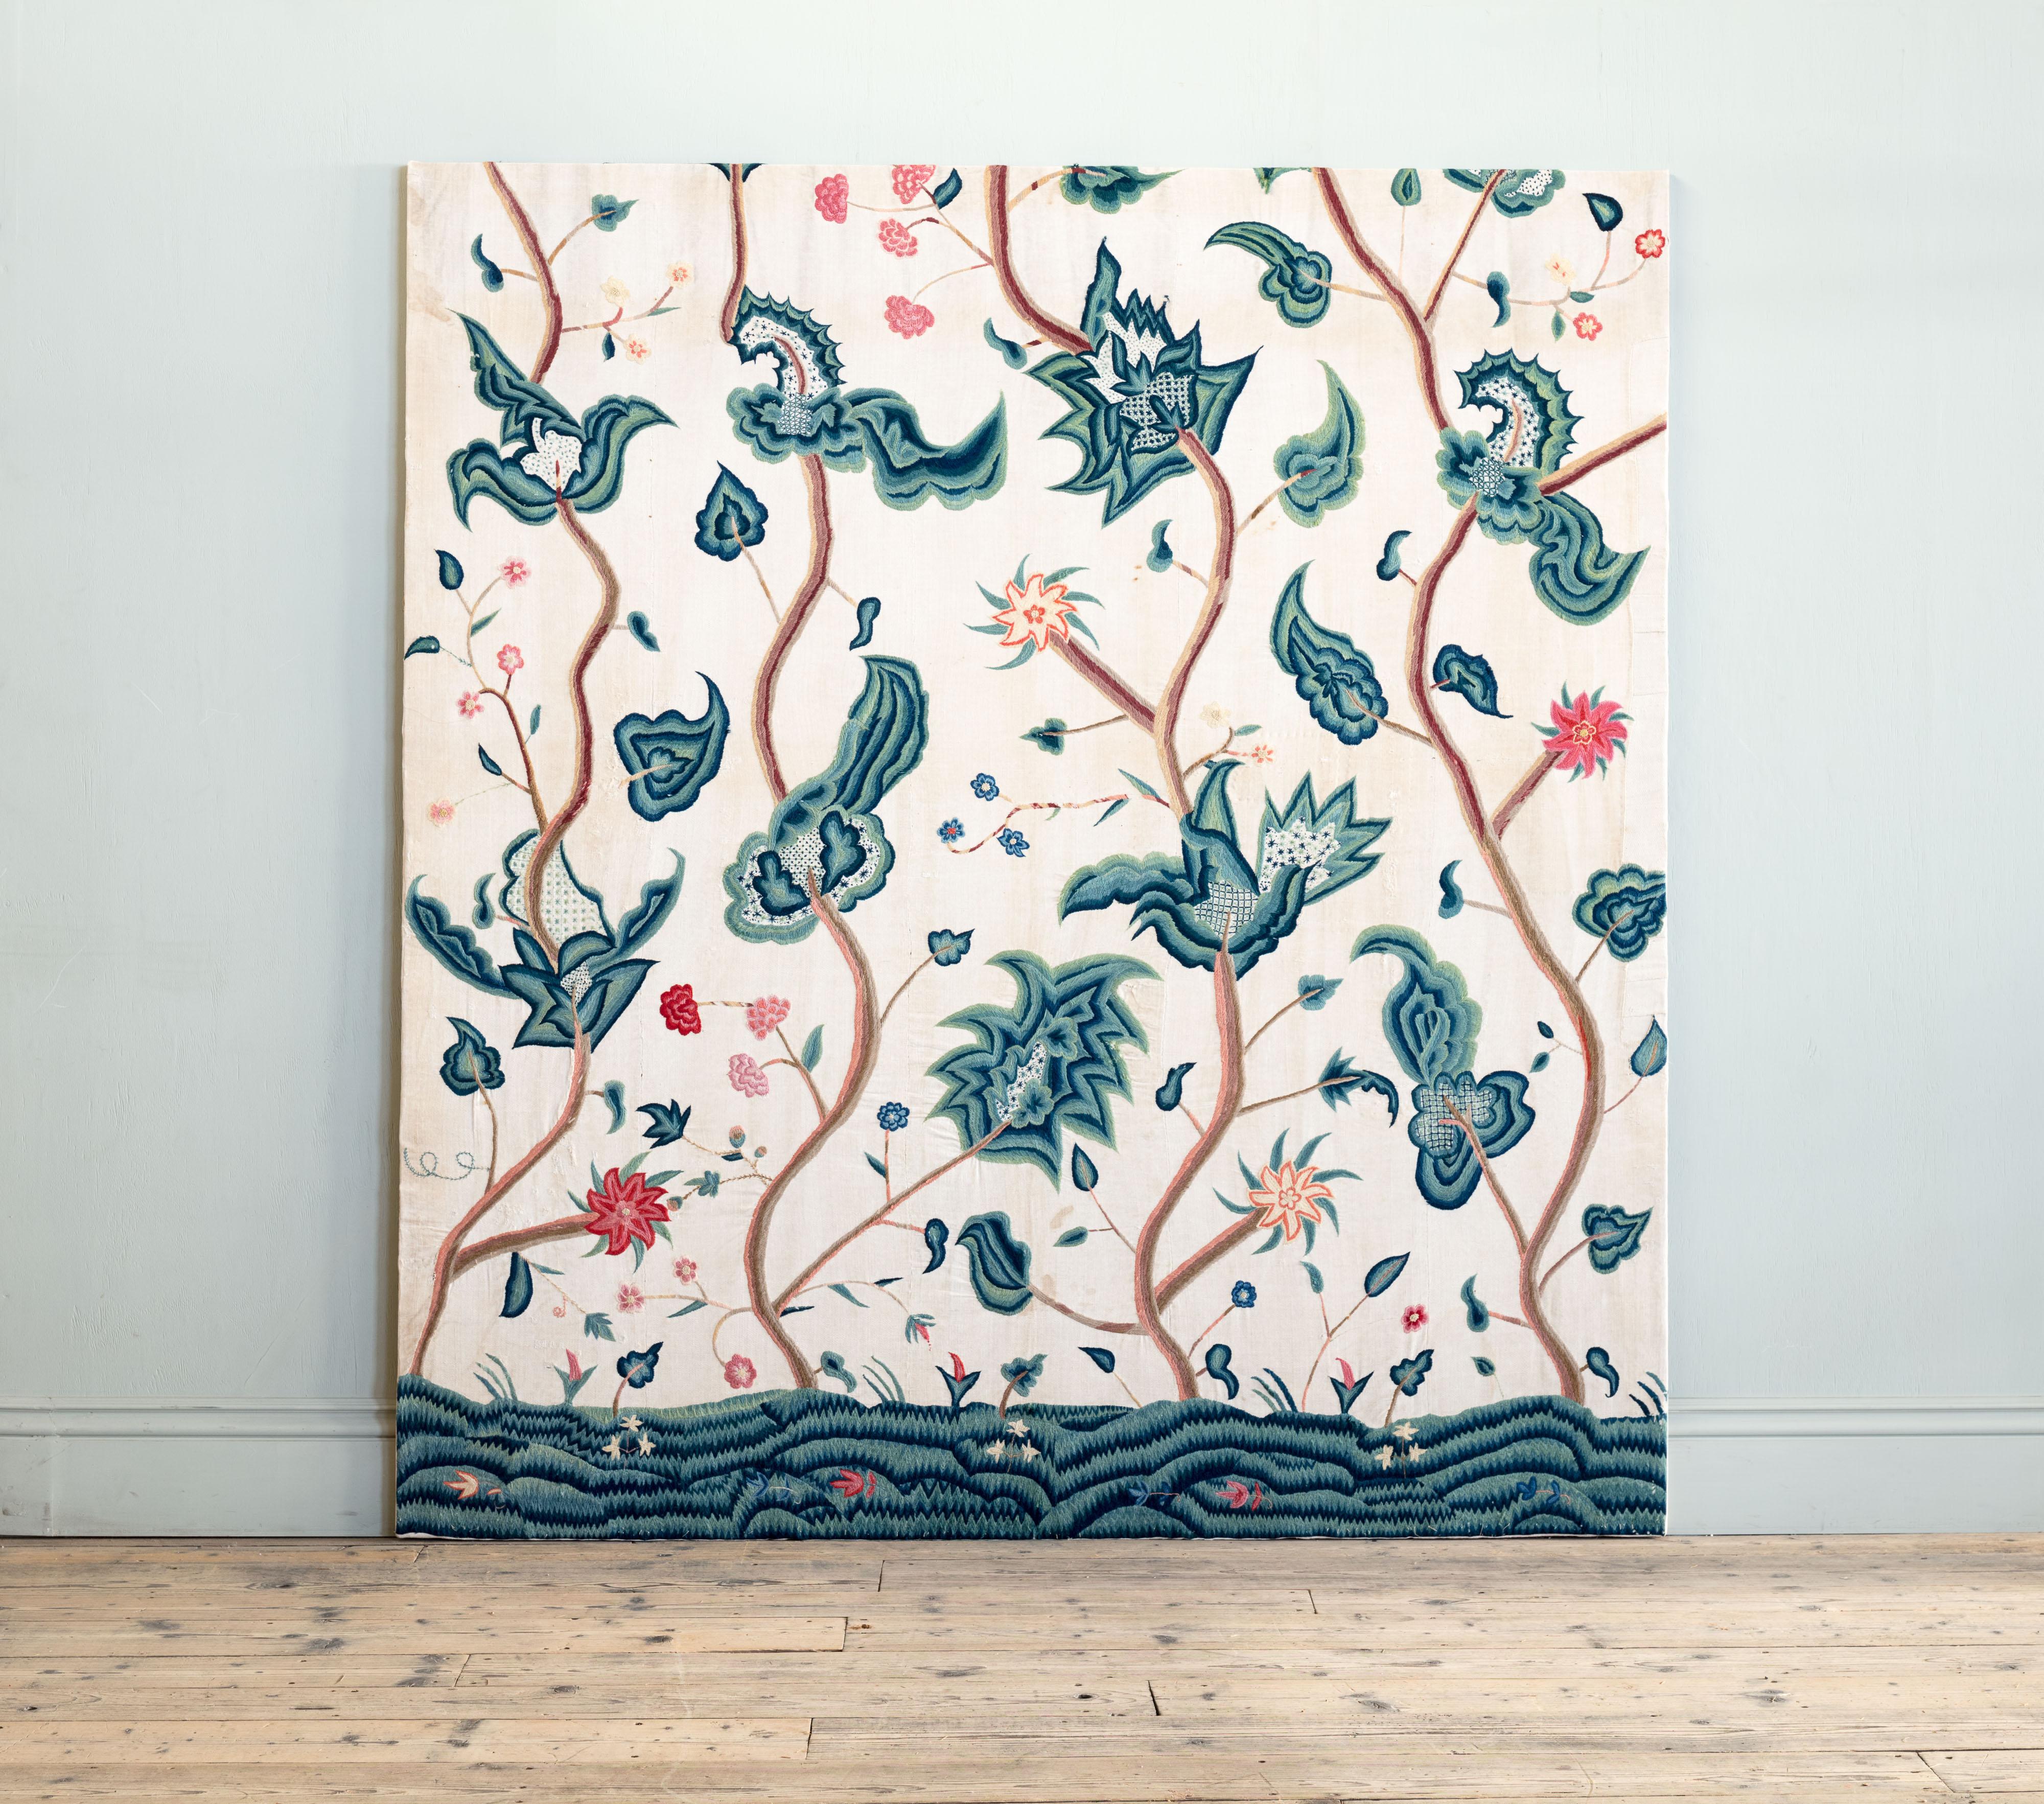 On twilled linen ground, with large scale stylised leafy and blossoming vines, embroidered in worsted wool coloured stitching. Backed on wooden stretchers.